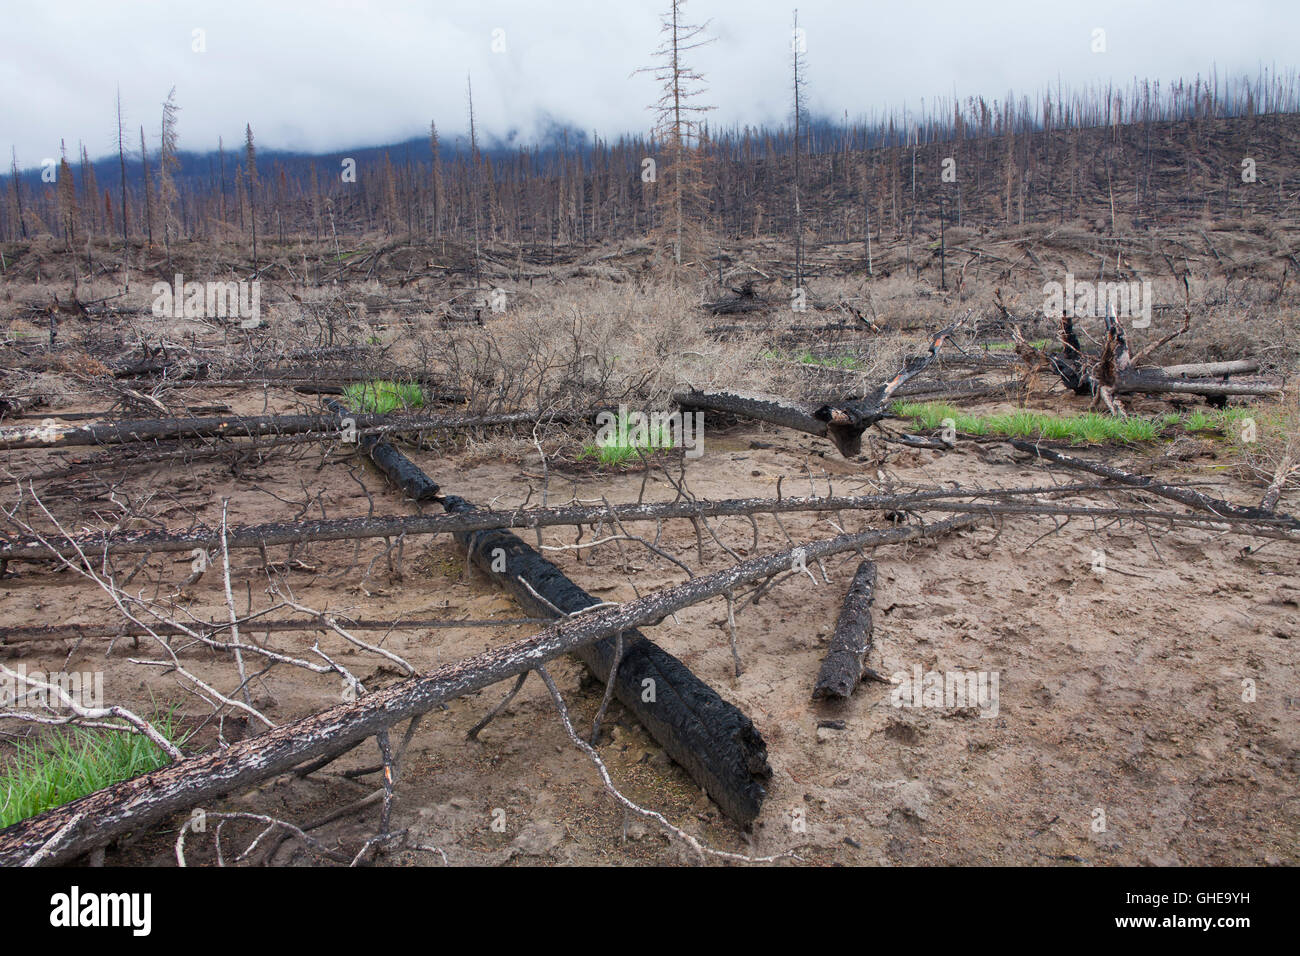 New grass shoots growing on scorched earth among charred tree trunks after wildfire, Jasper National Park, Alberta, Canada Stock Photo